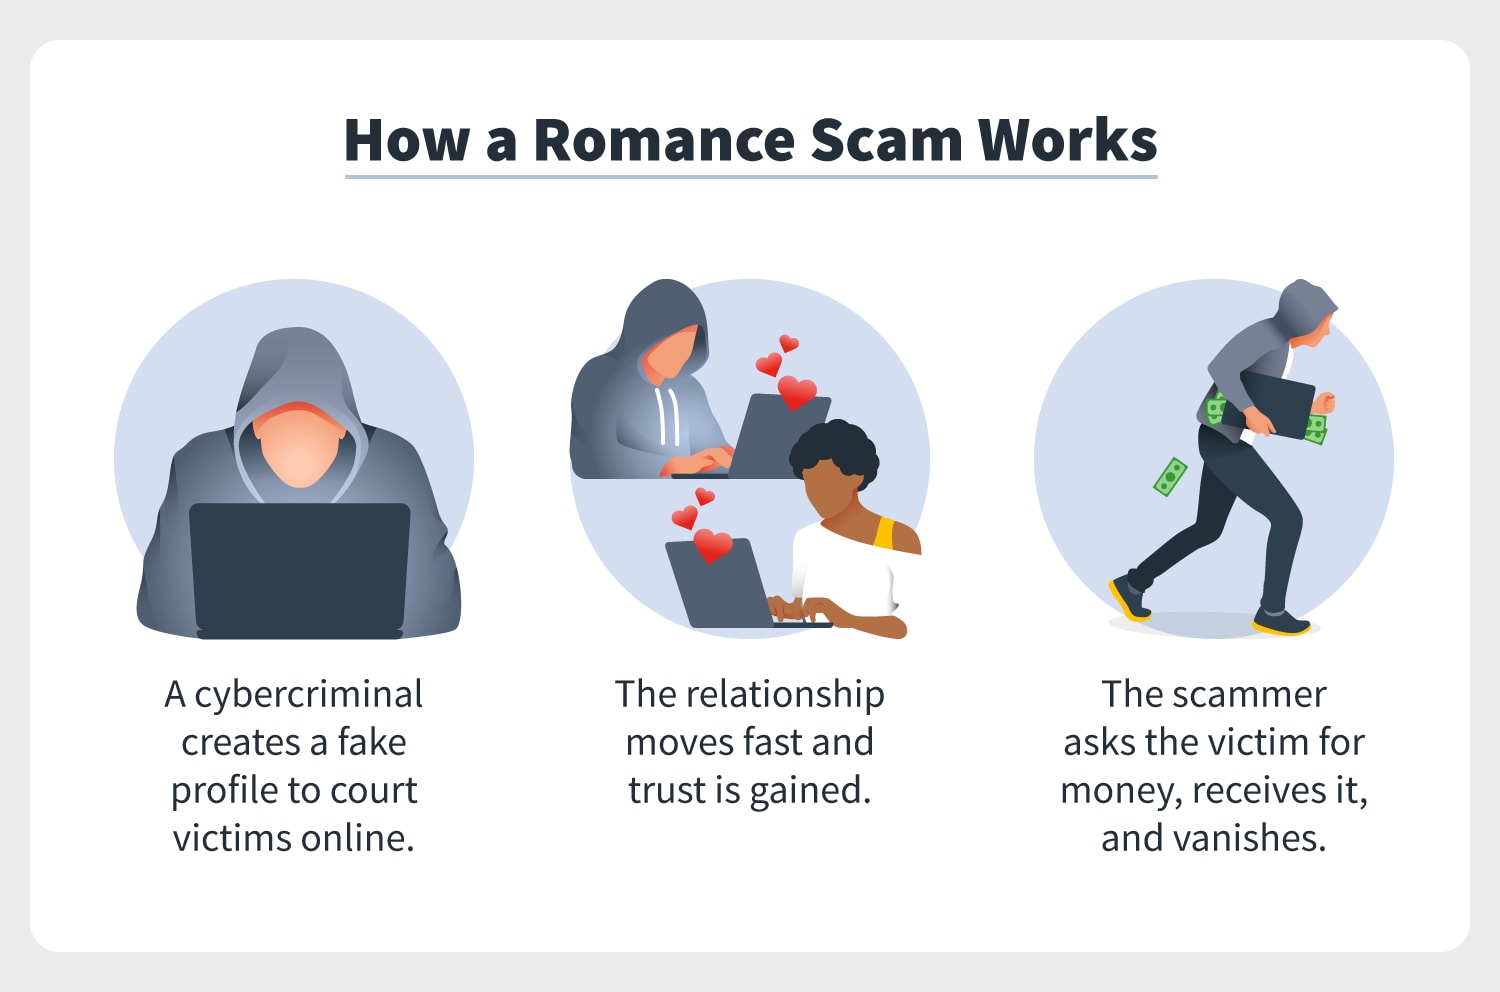 an explanation of how a romance scam works in three steps